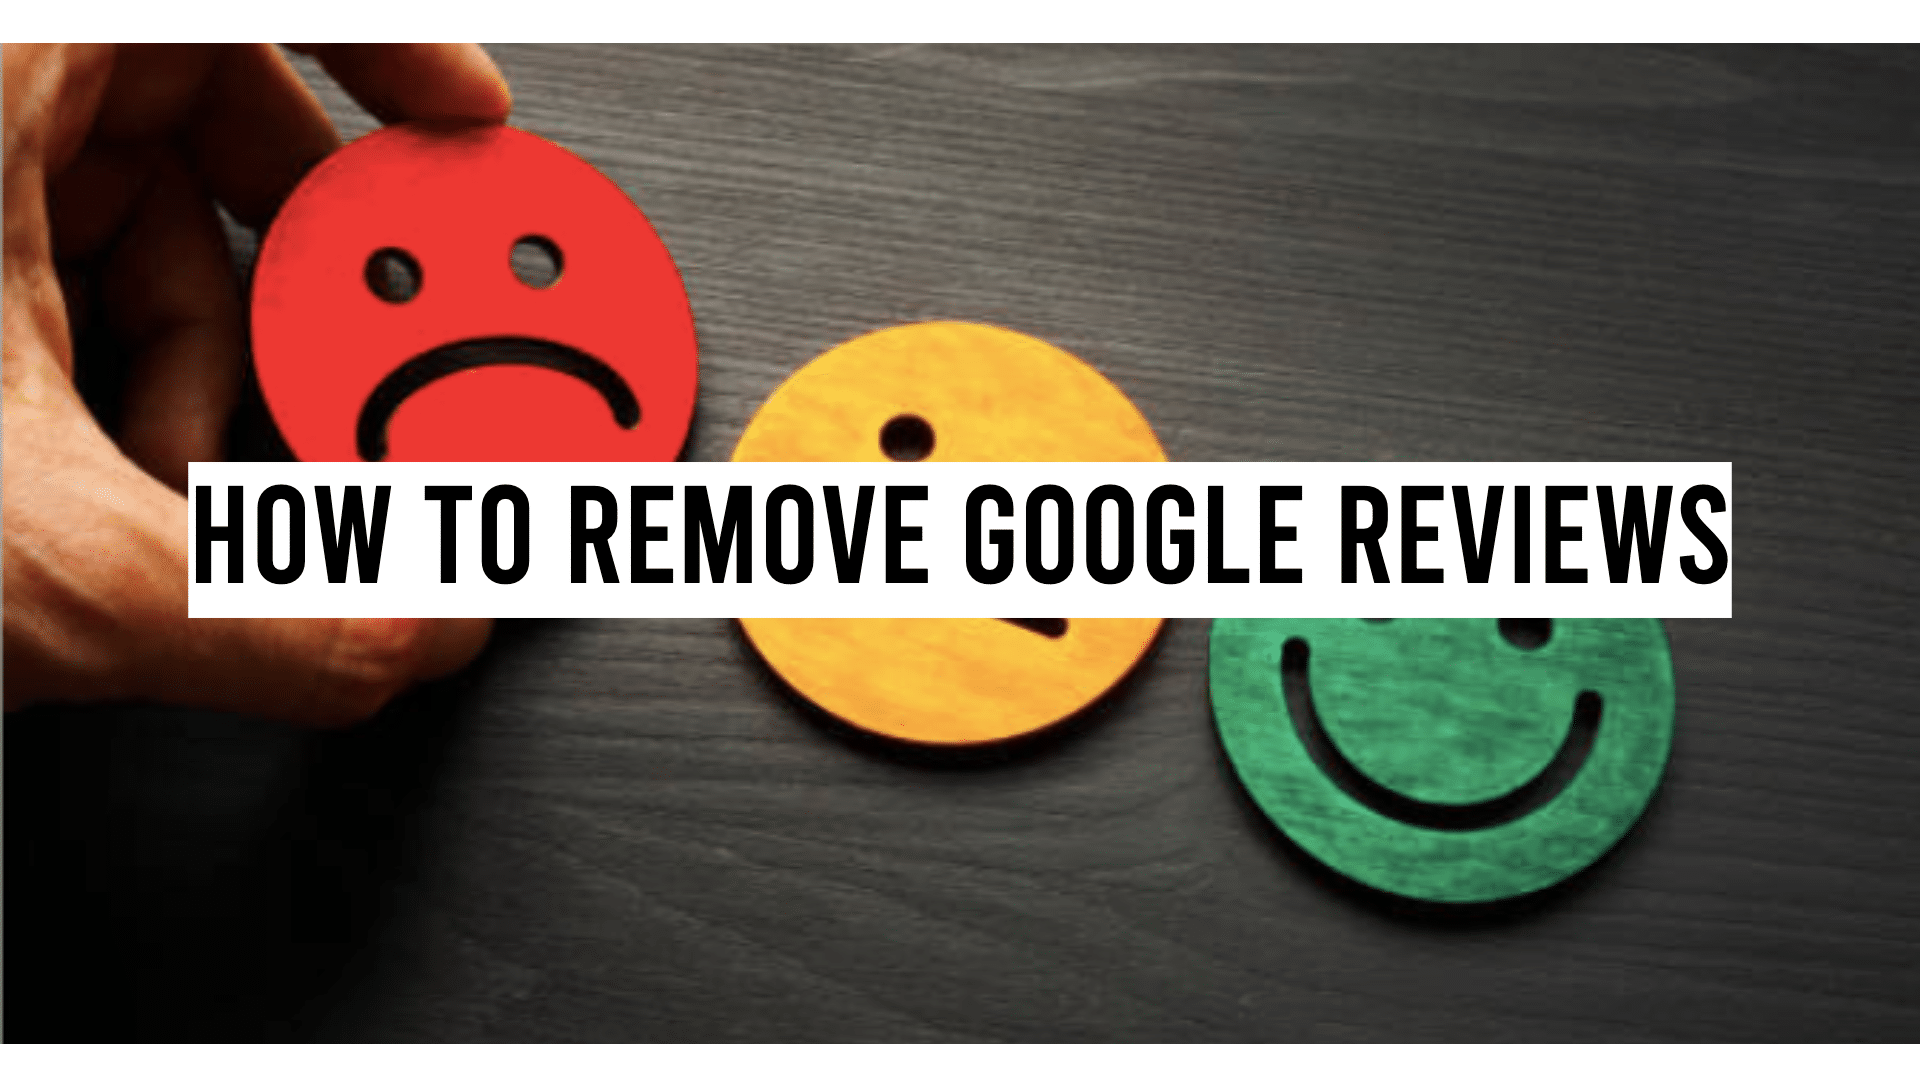 How to Remove Google Reviews image